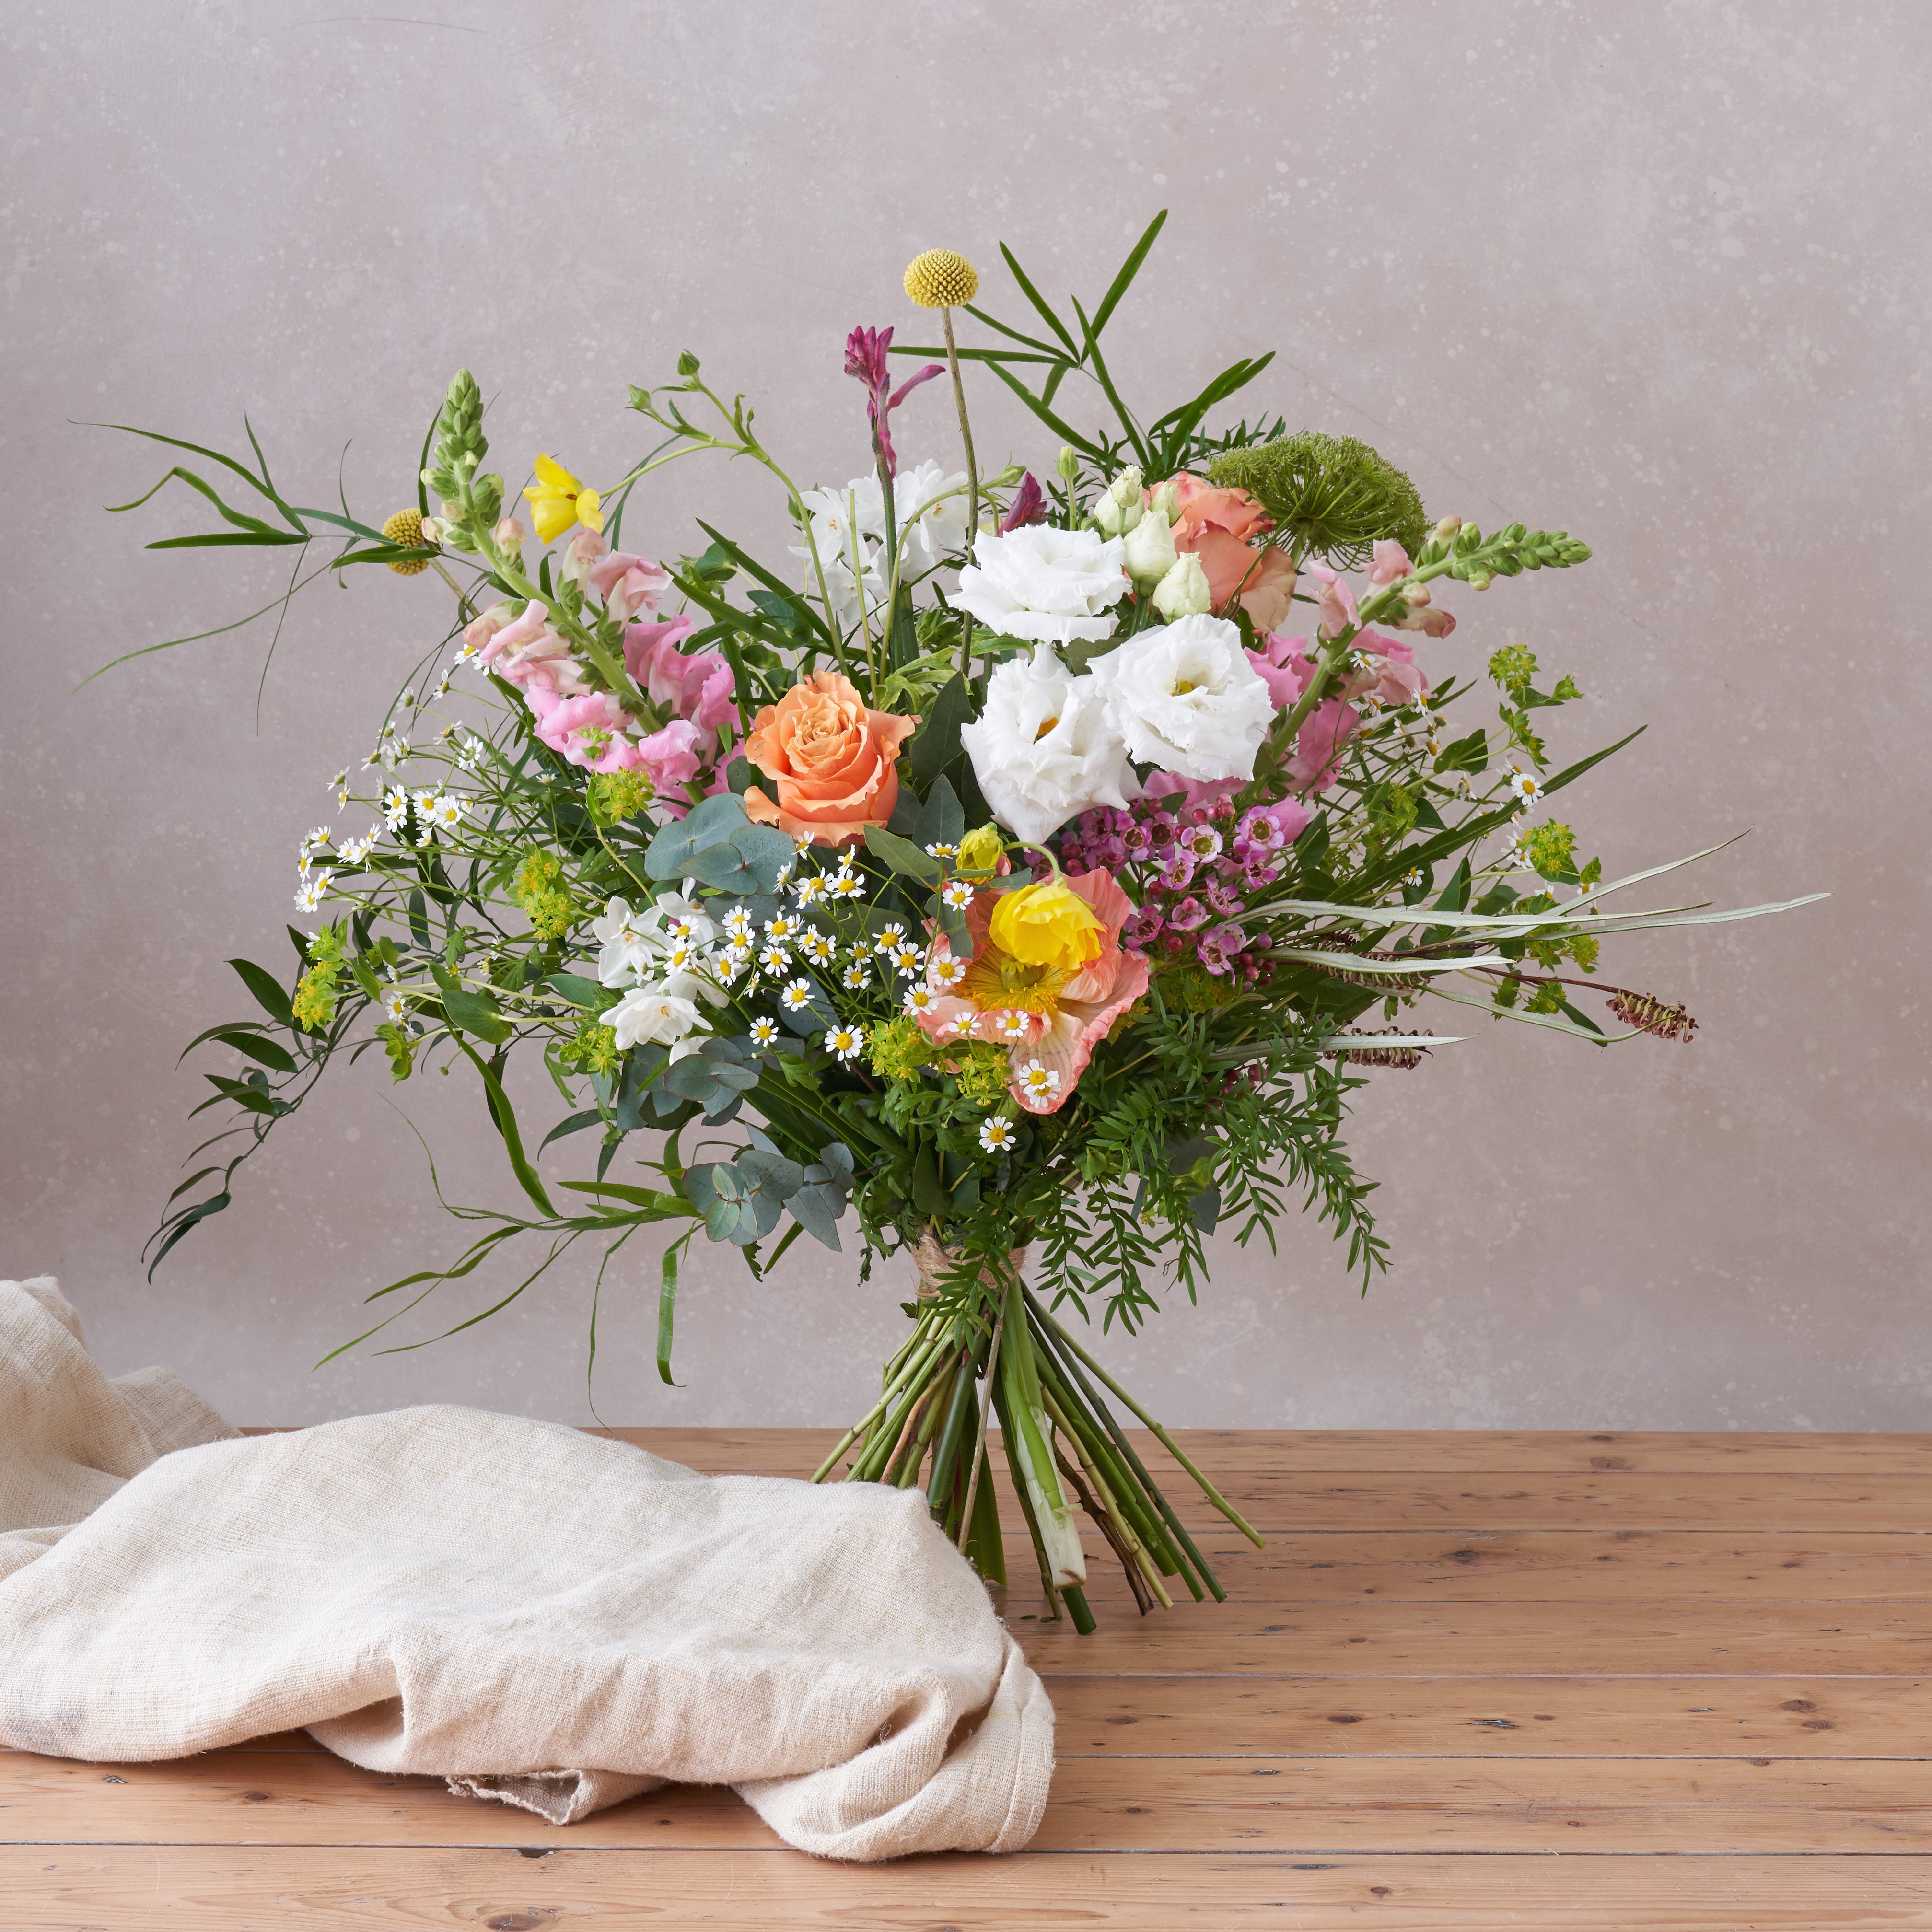 meadow in bloom fresh flowers bouquet for same and next day delivery in London and UK